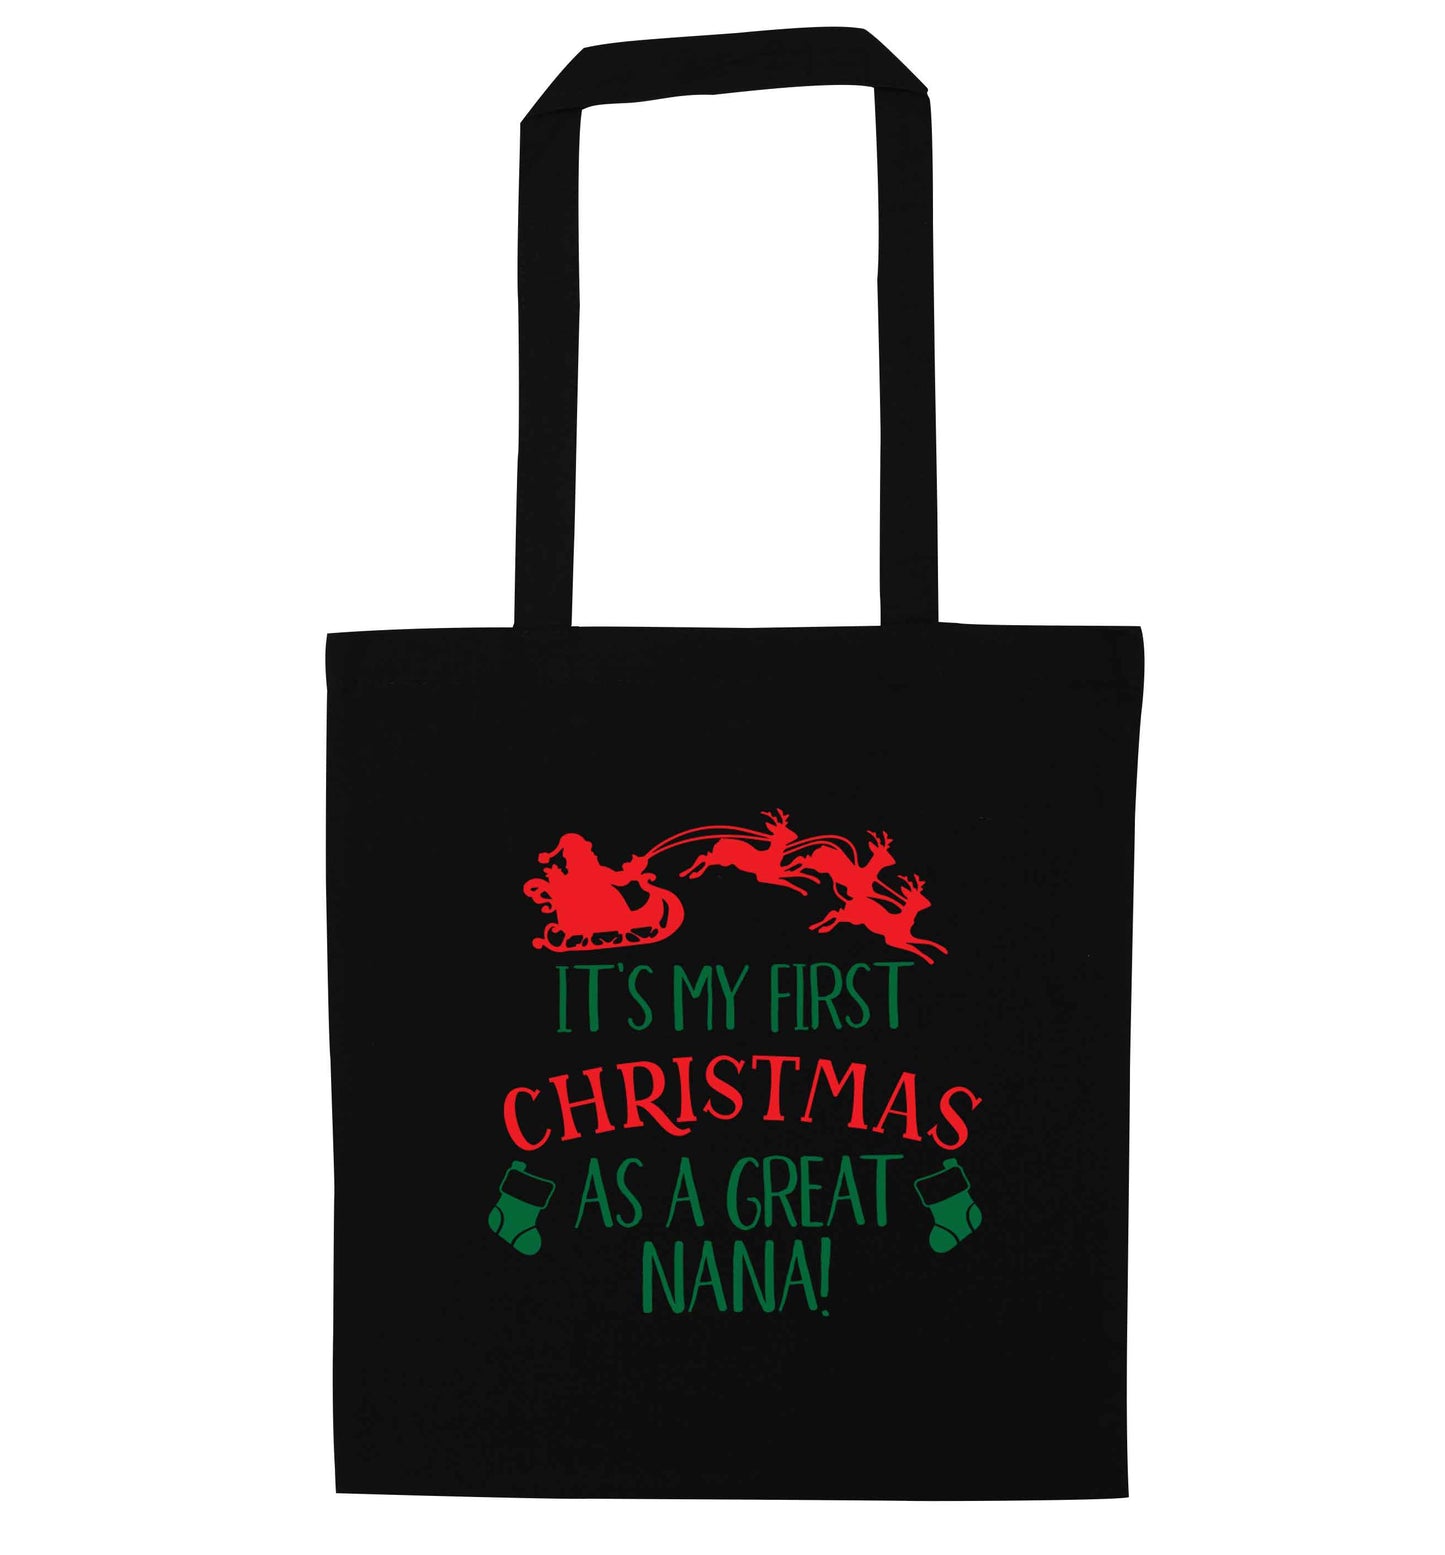 It's my first Christmas as a great nana! black tote bag